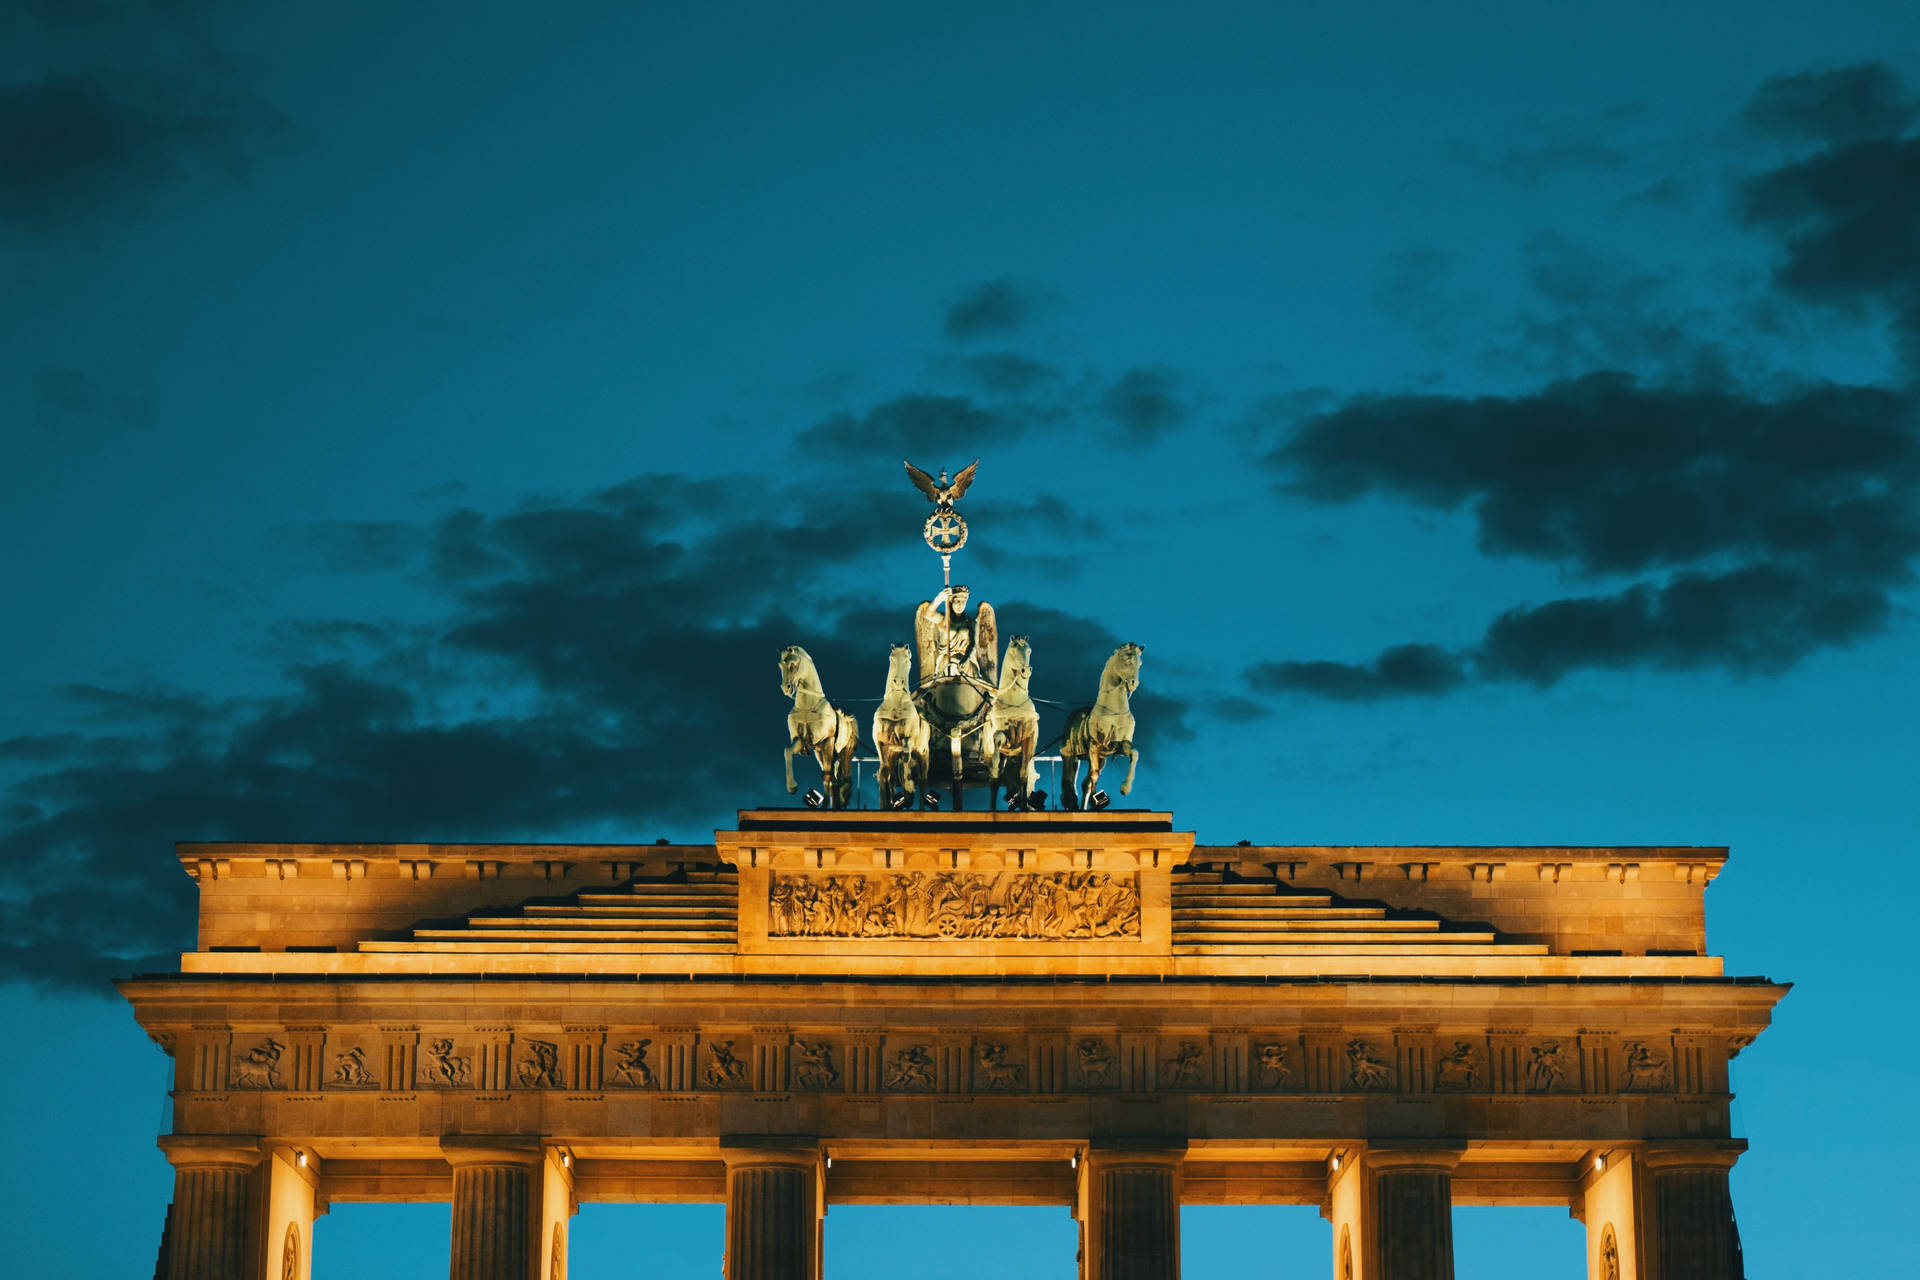 The Berlin Monument Germany Background